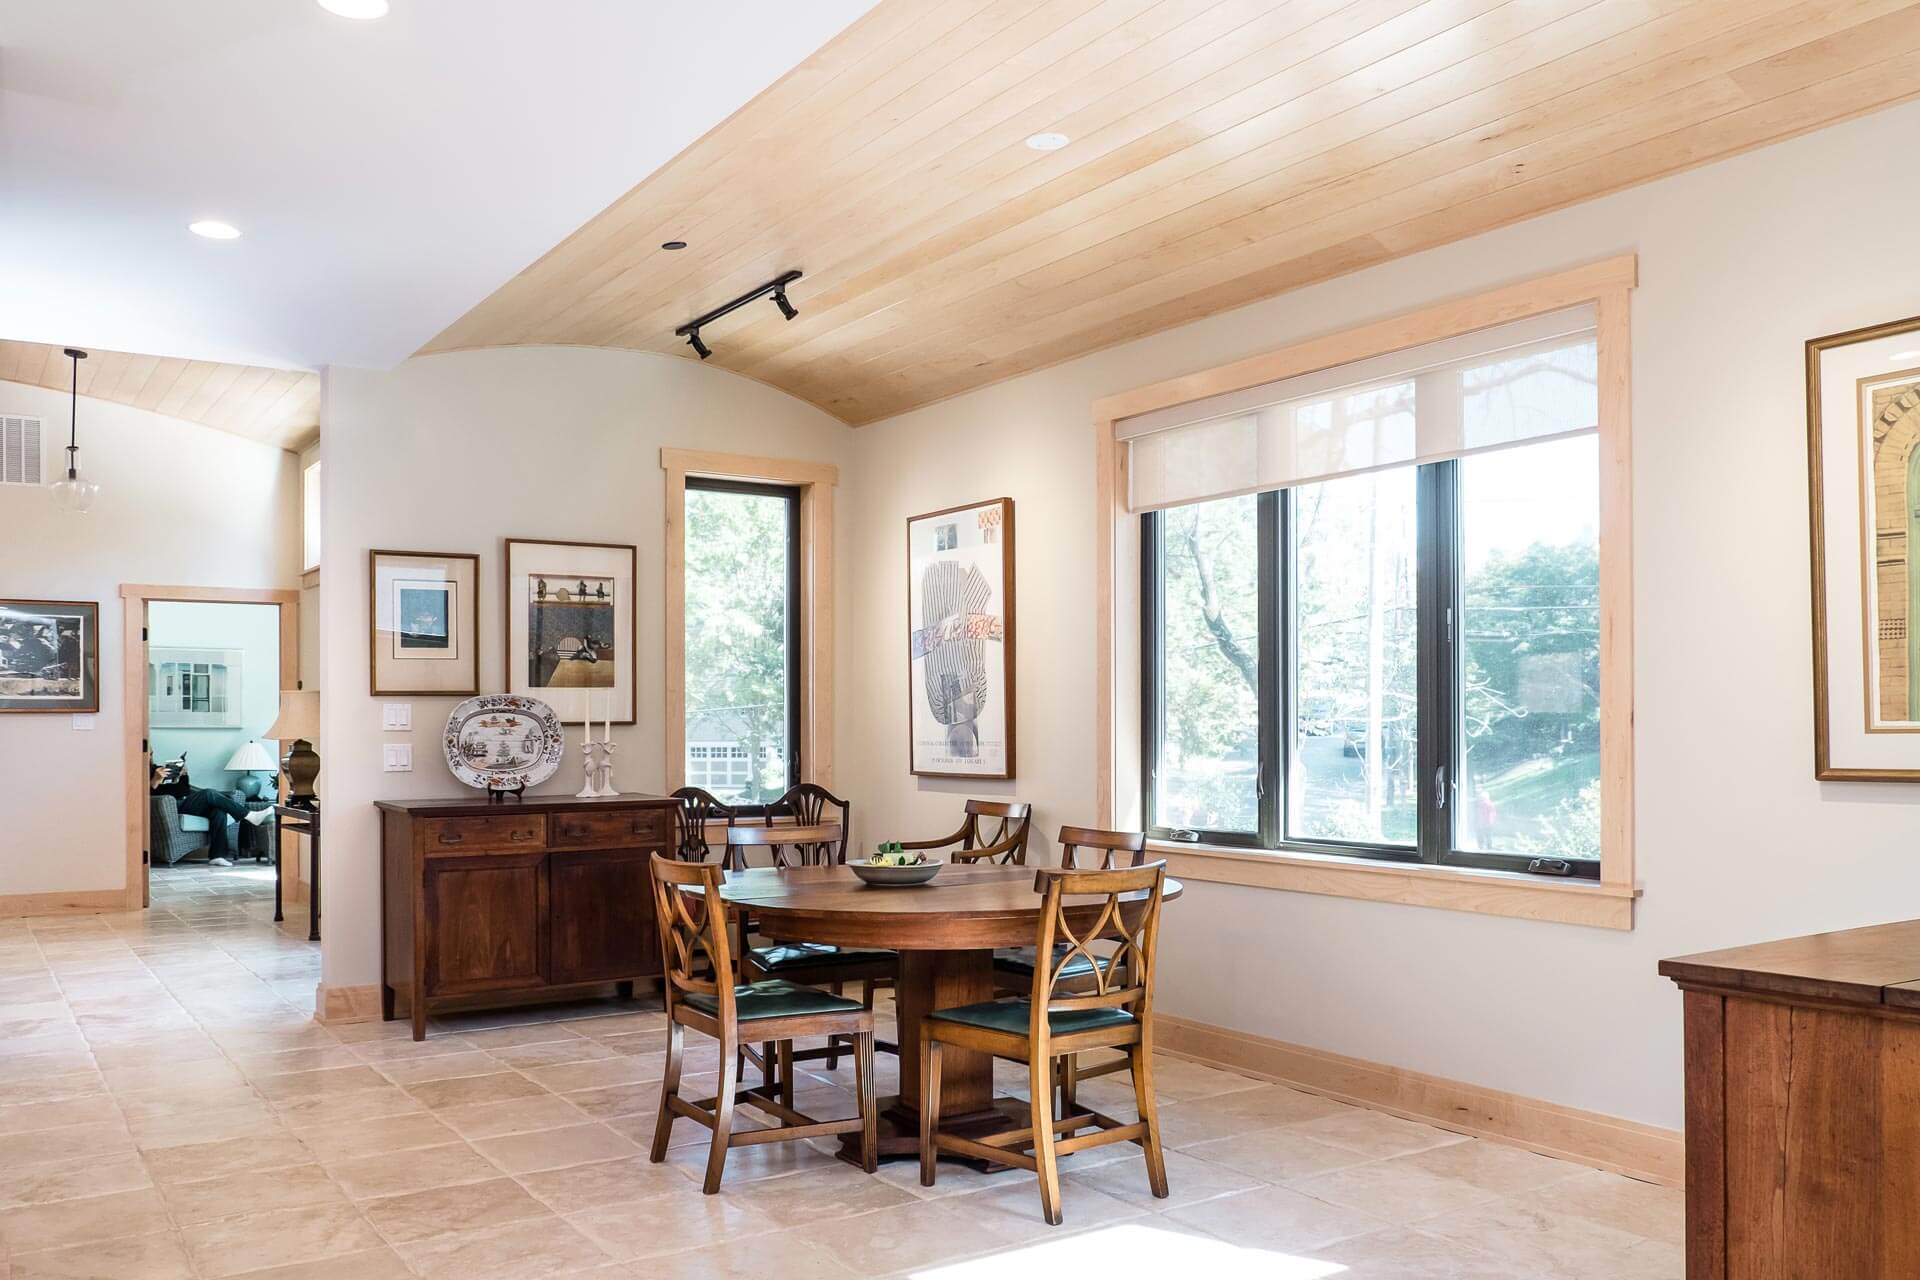 Dining-room-with-vaulted-paneled-ceiling-Accessible-home-for-retired-couple-Chevy-Chase-MD